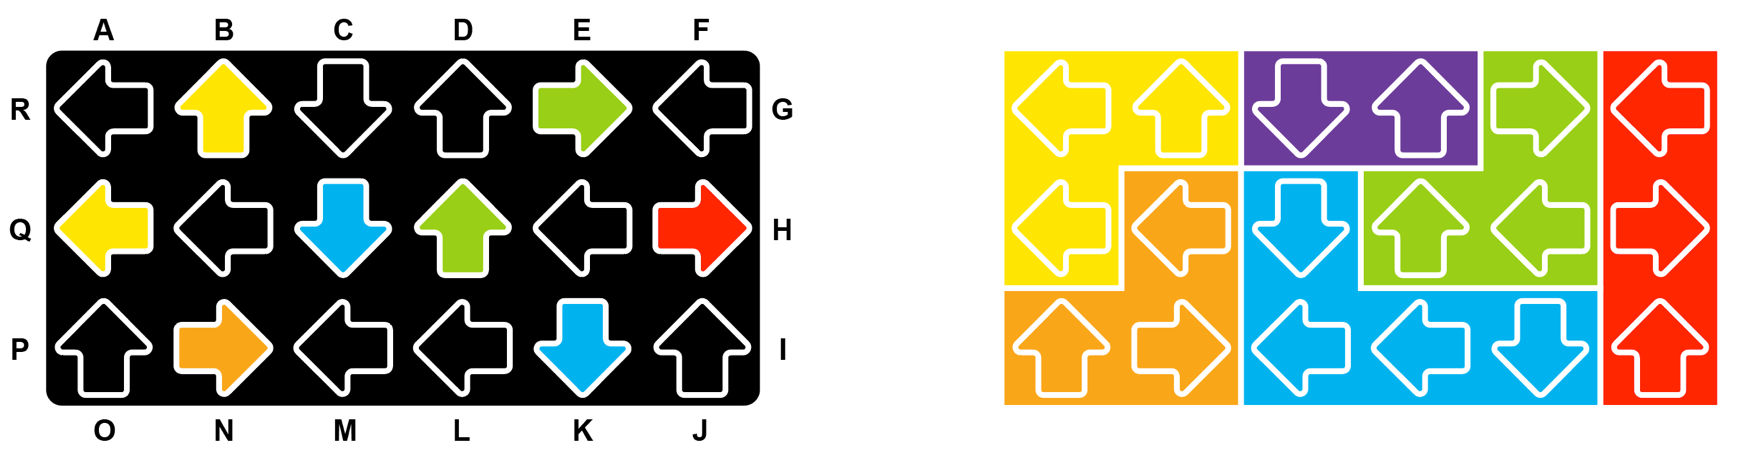 example of a starter challenge and solutions of IQ-Arrows